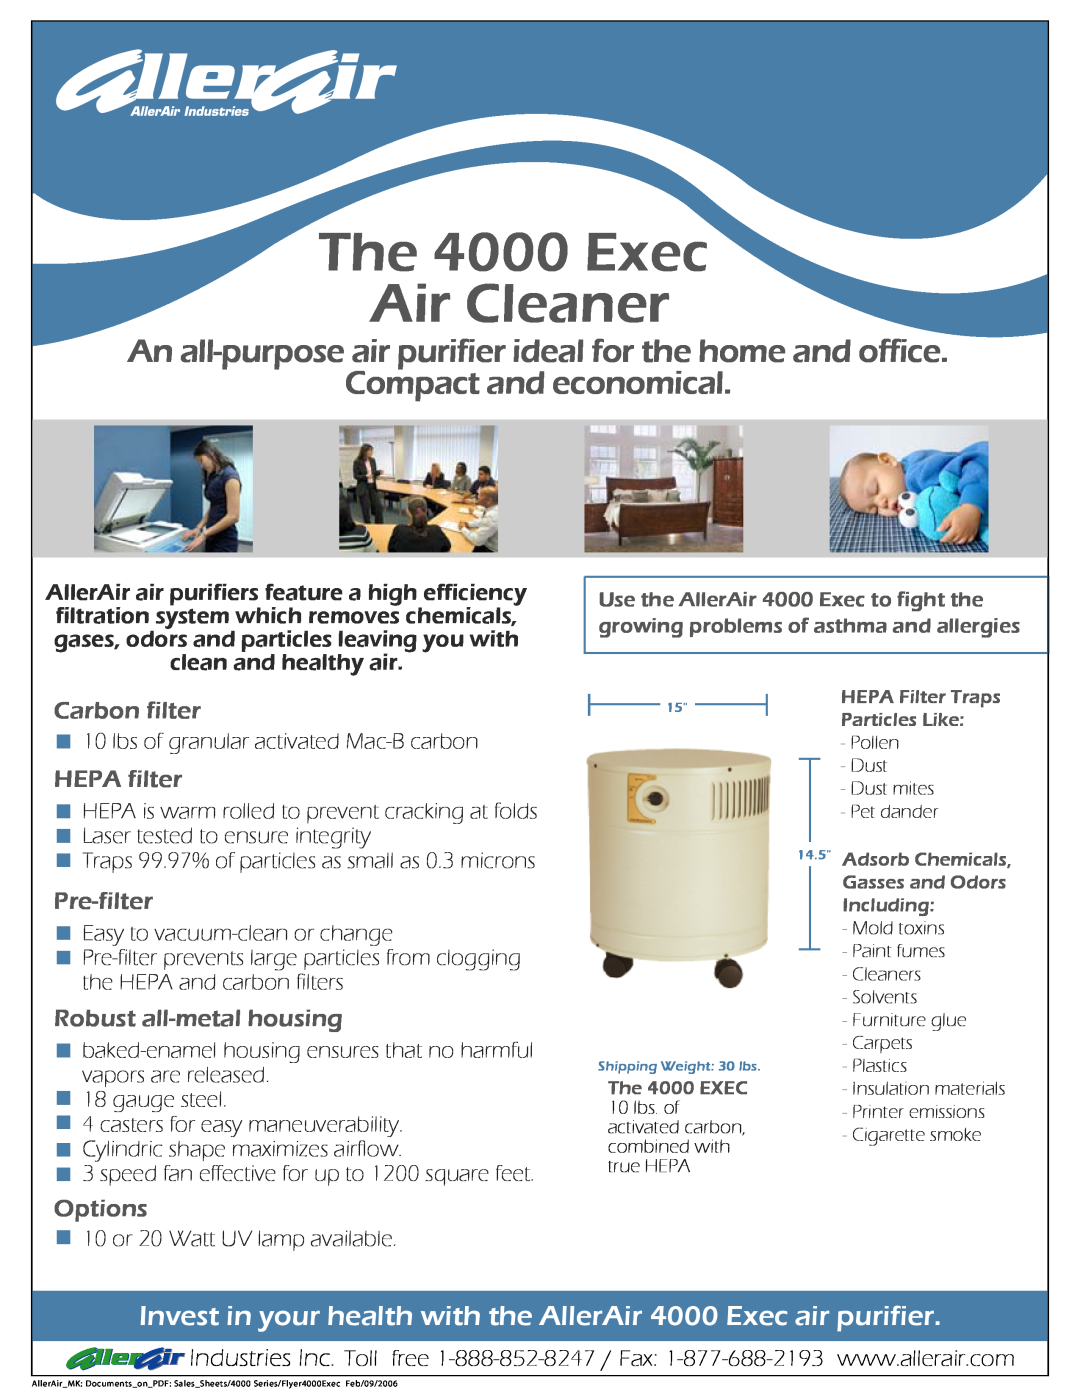 AllerAir 4000 Exec manual Carbon filter, HEPA filter, Pre-filter, Robust all-metalhousing, Options, Compact and economical 